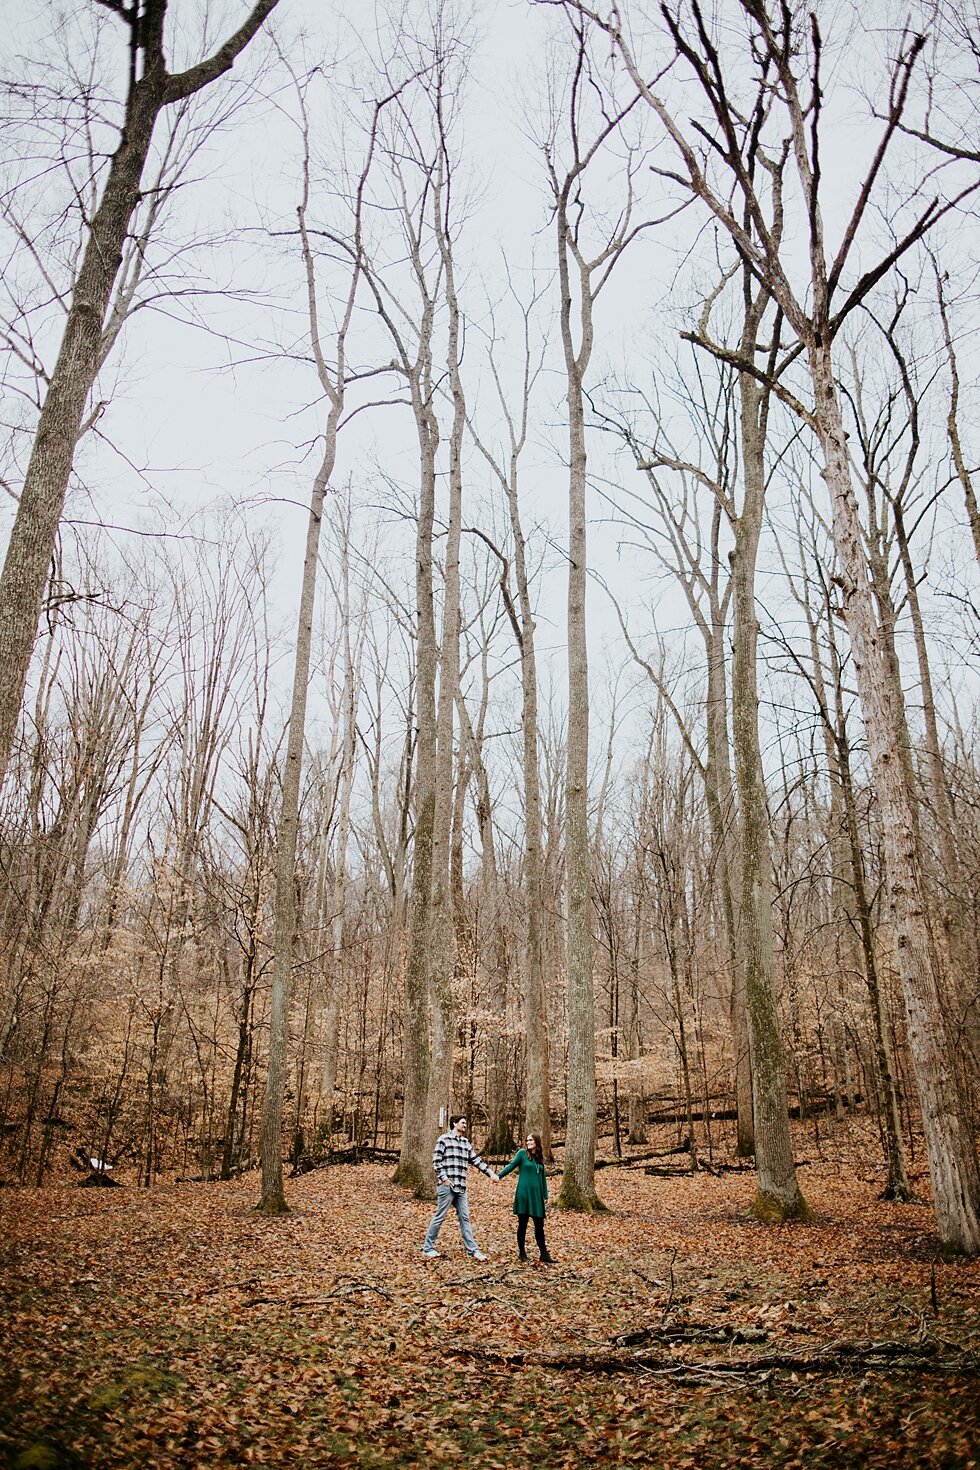  This engaged couple wore a great combination of colors and patters that stood out against the rainy winter backdrop that Bernheim Forest provided. Louisville photographer winter engagement Bernheim Forest emerald green dress plaid shirt rainy day Ke